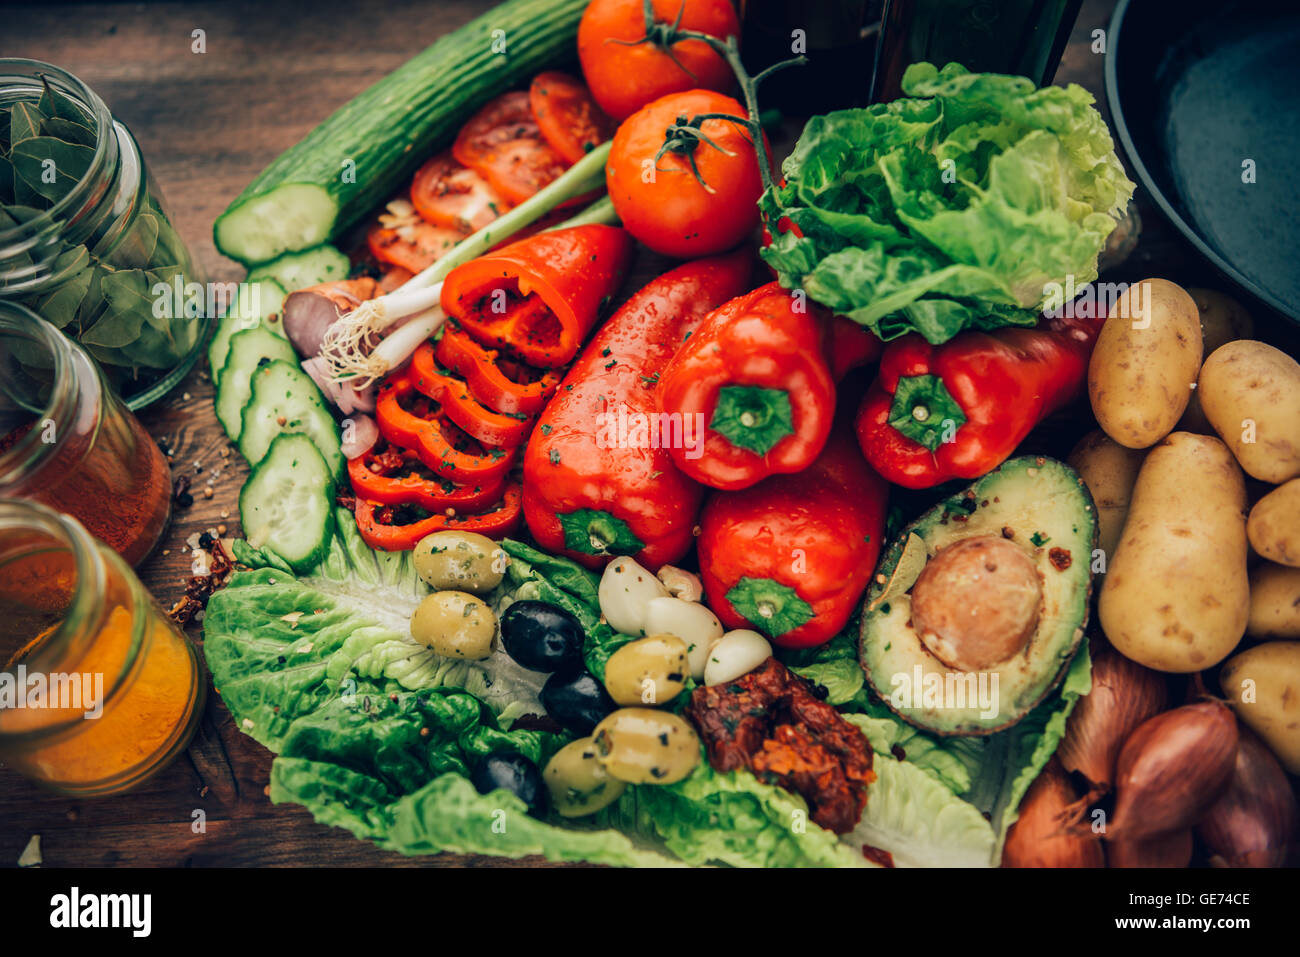 Beauty shots of food on a rustic setting. Stock Photo